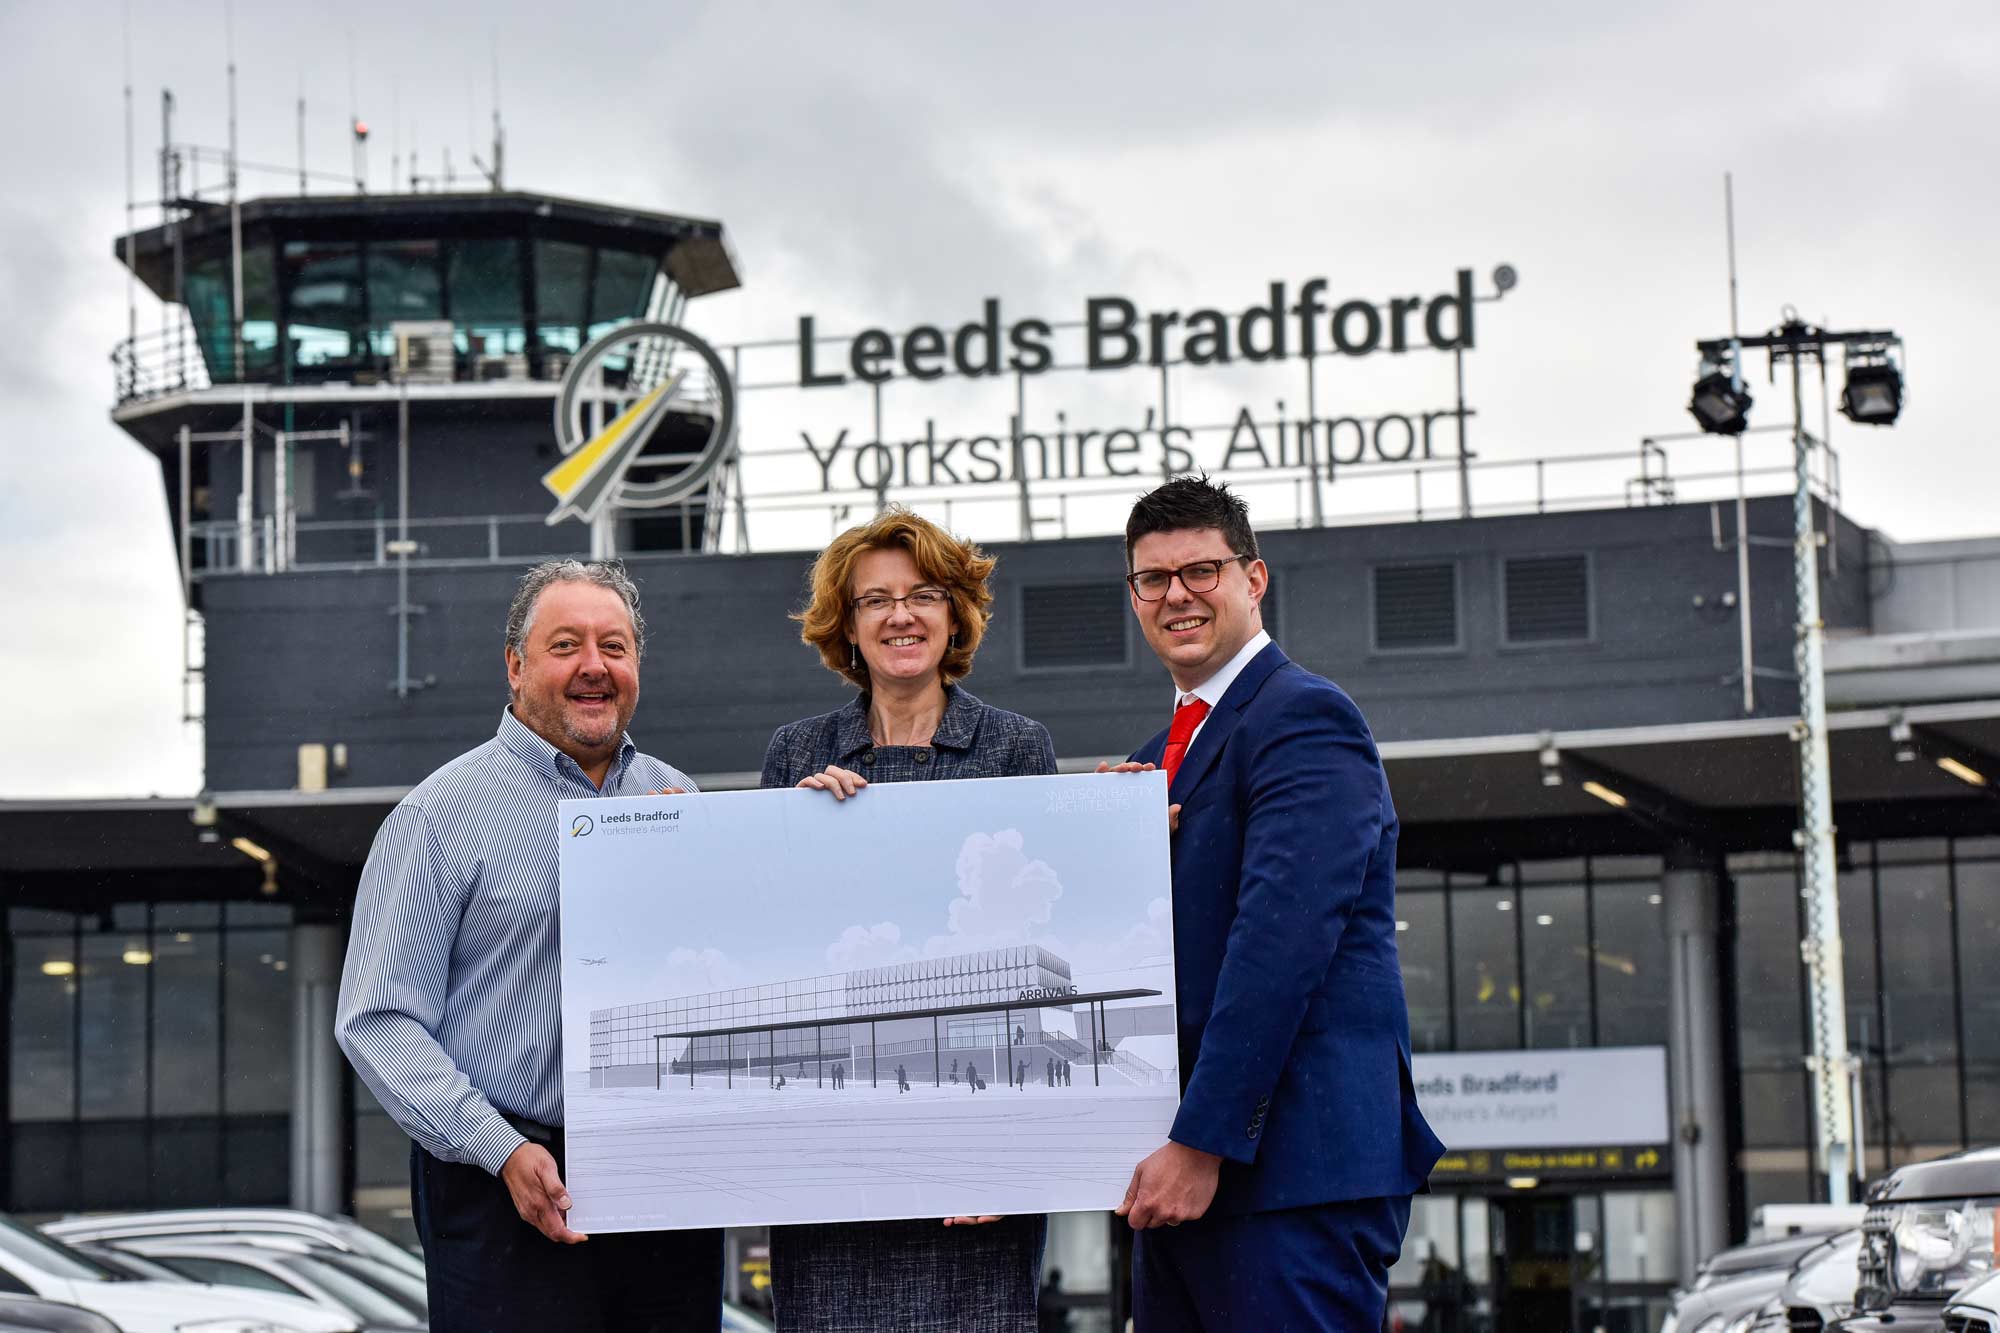 David Laws, CEO Leeds Bradford Airport with Cllr Susan Hinchcliffe, Chair of West Yorkshire Combined Authority and Henri Murison, Director of Northern Powerhouse Partnership